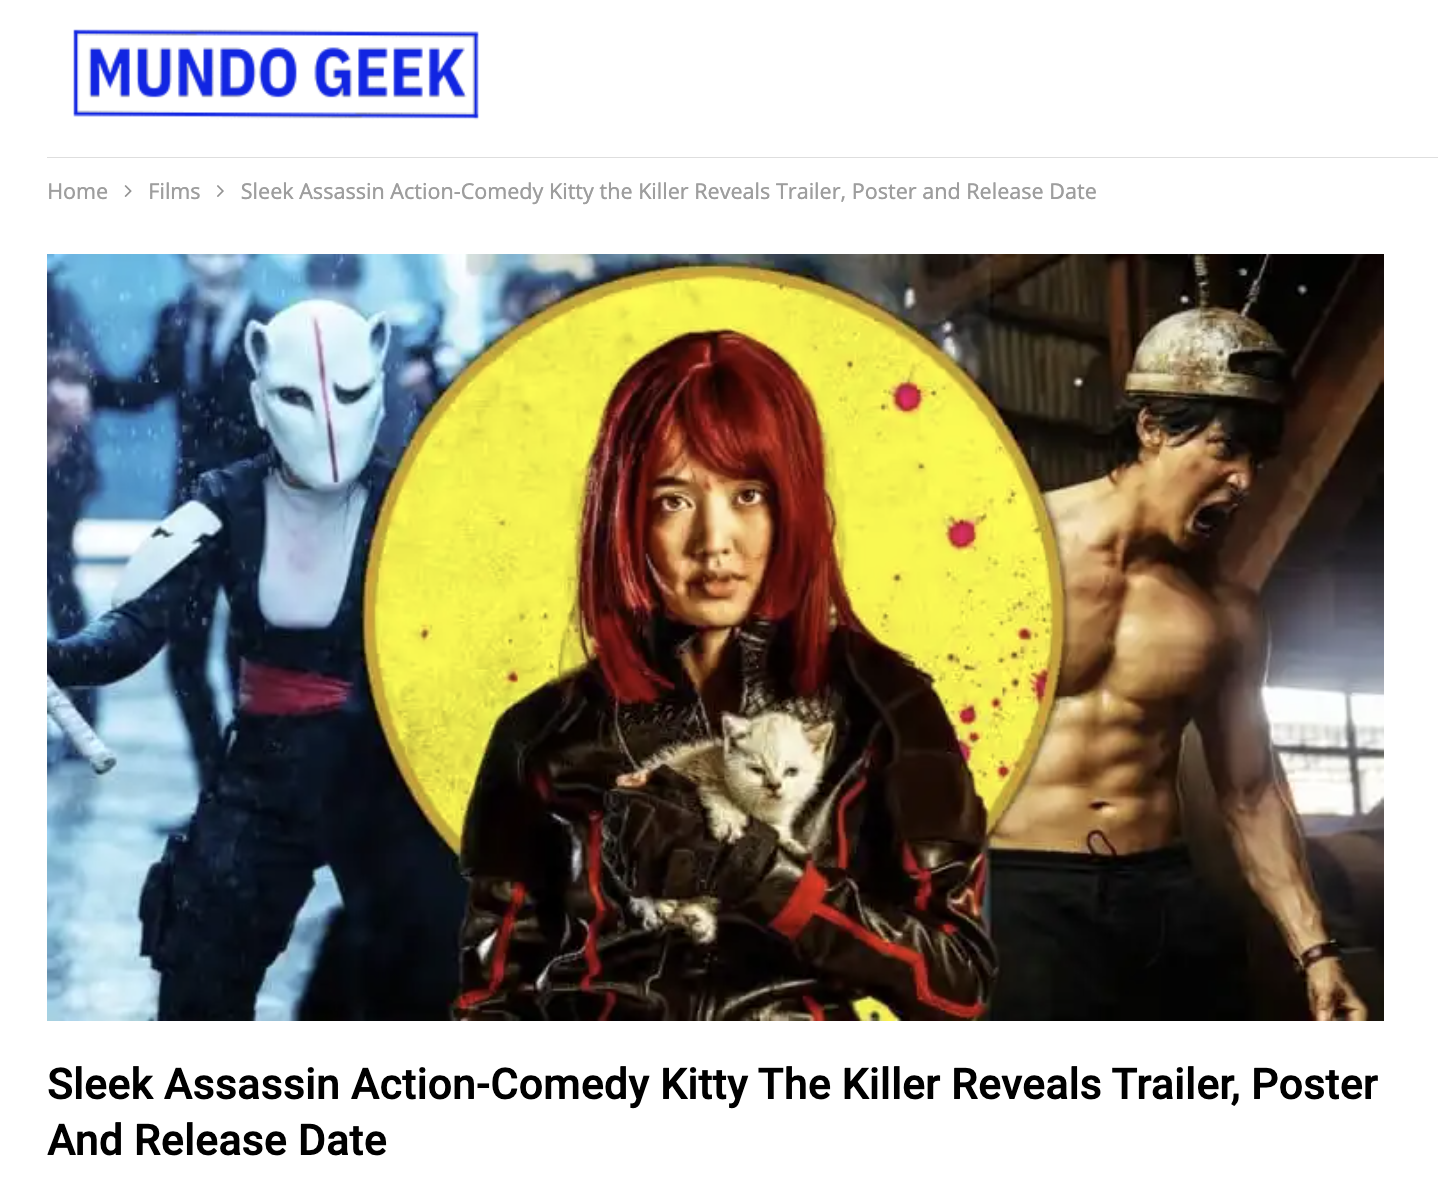 Sleek Assassin Action-Comedy Kitty The Killer Reveals Trailer, Poster And Release Date